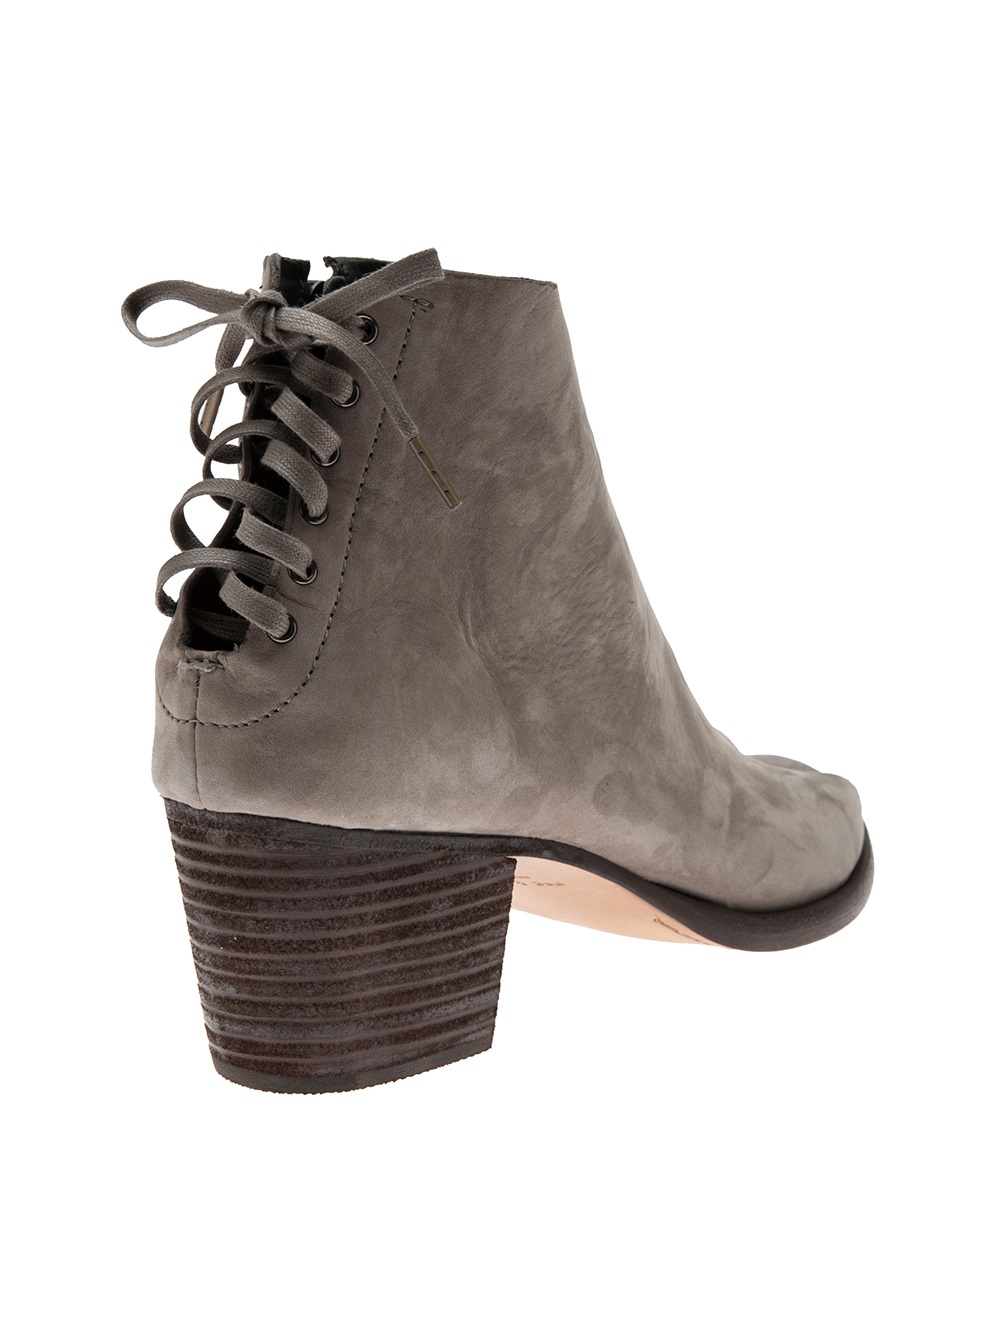 Louisiana Youth Academy Boot Camp: Rag And Bone Ankle Boot